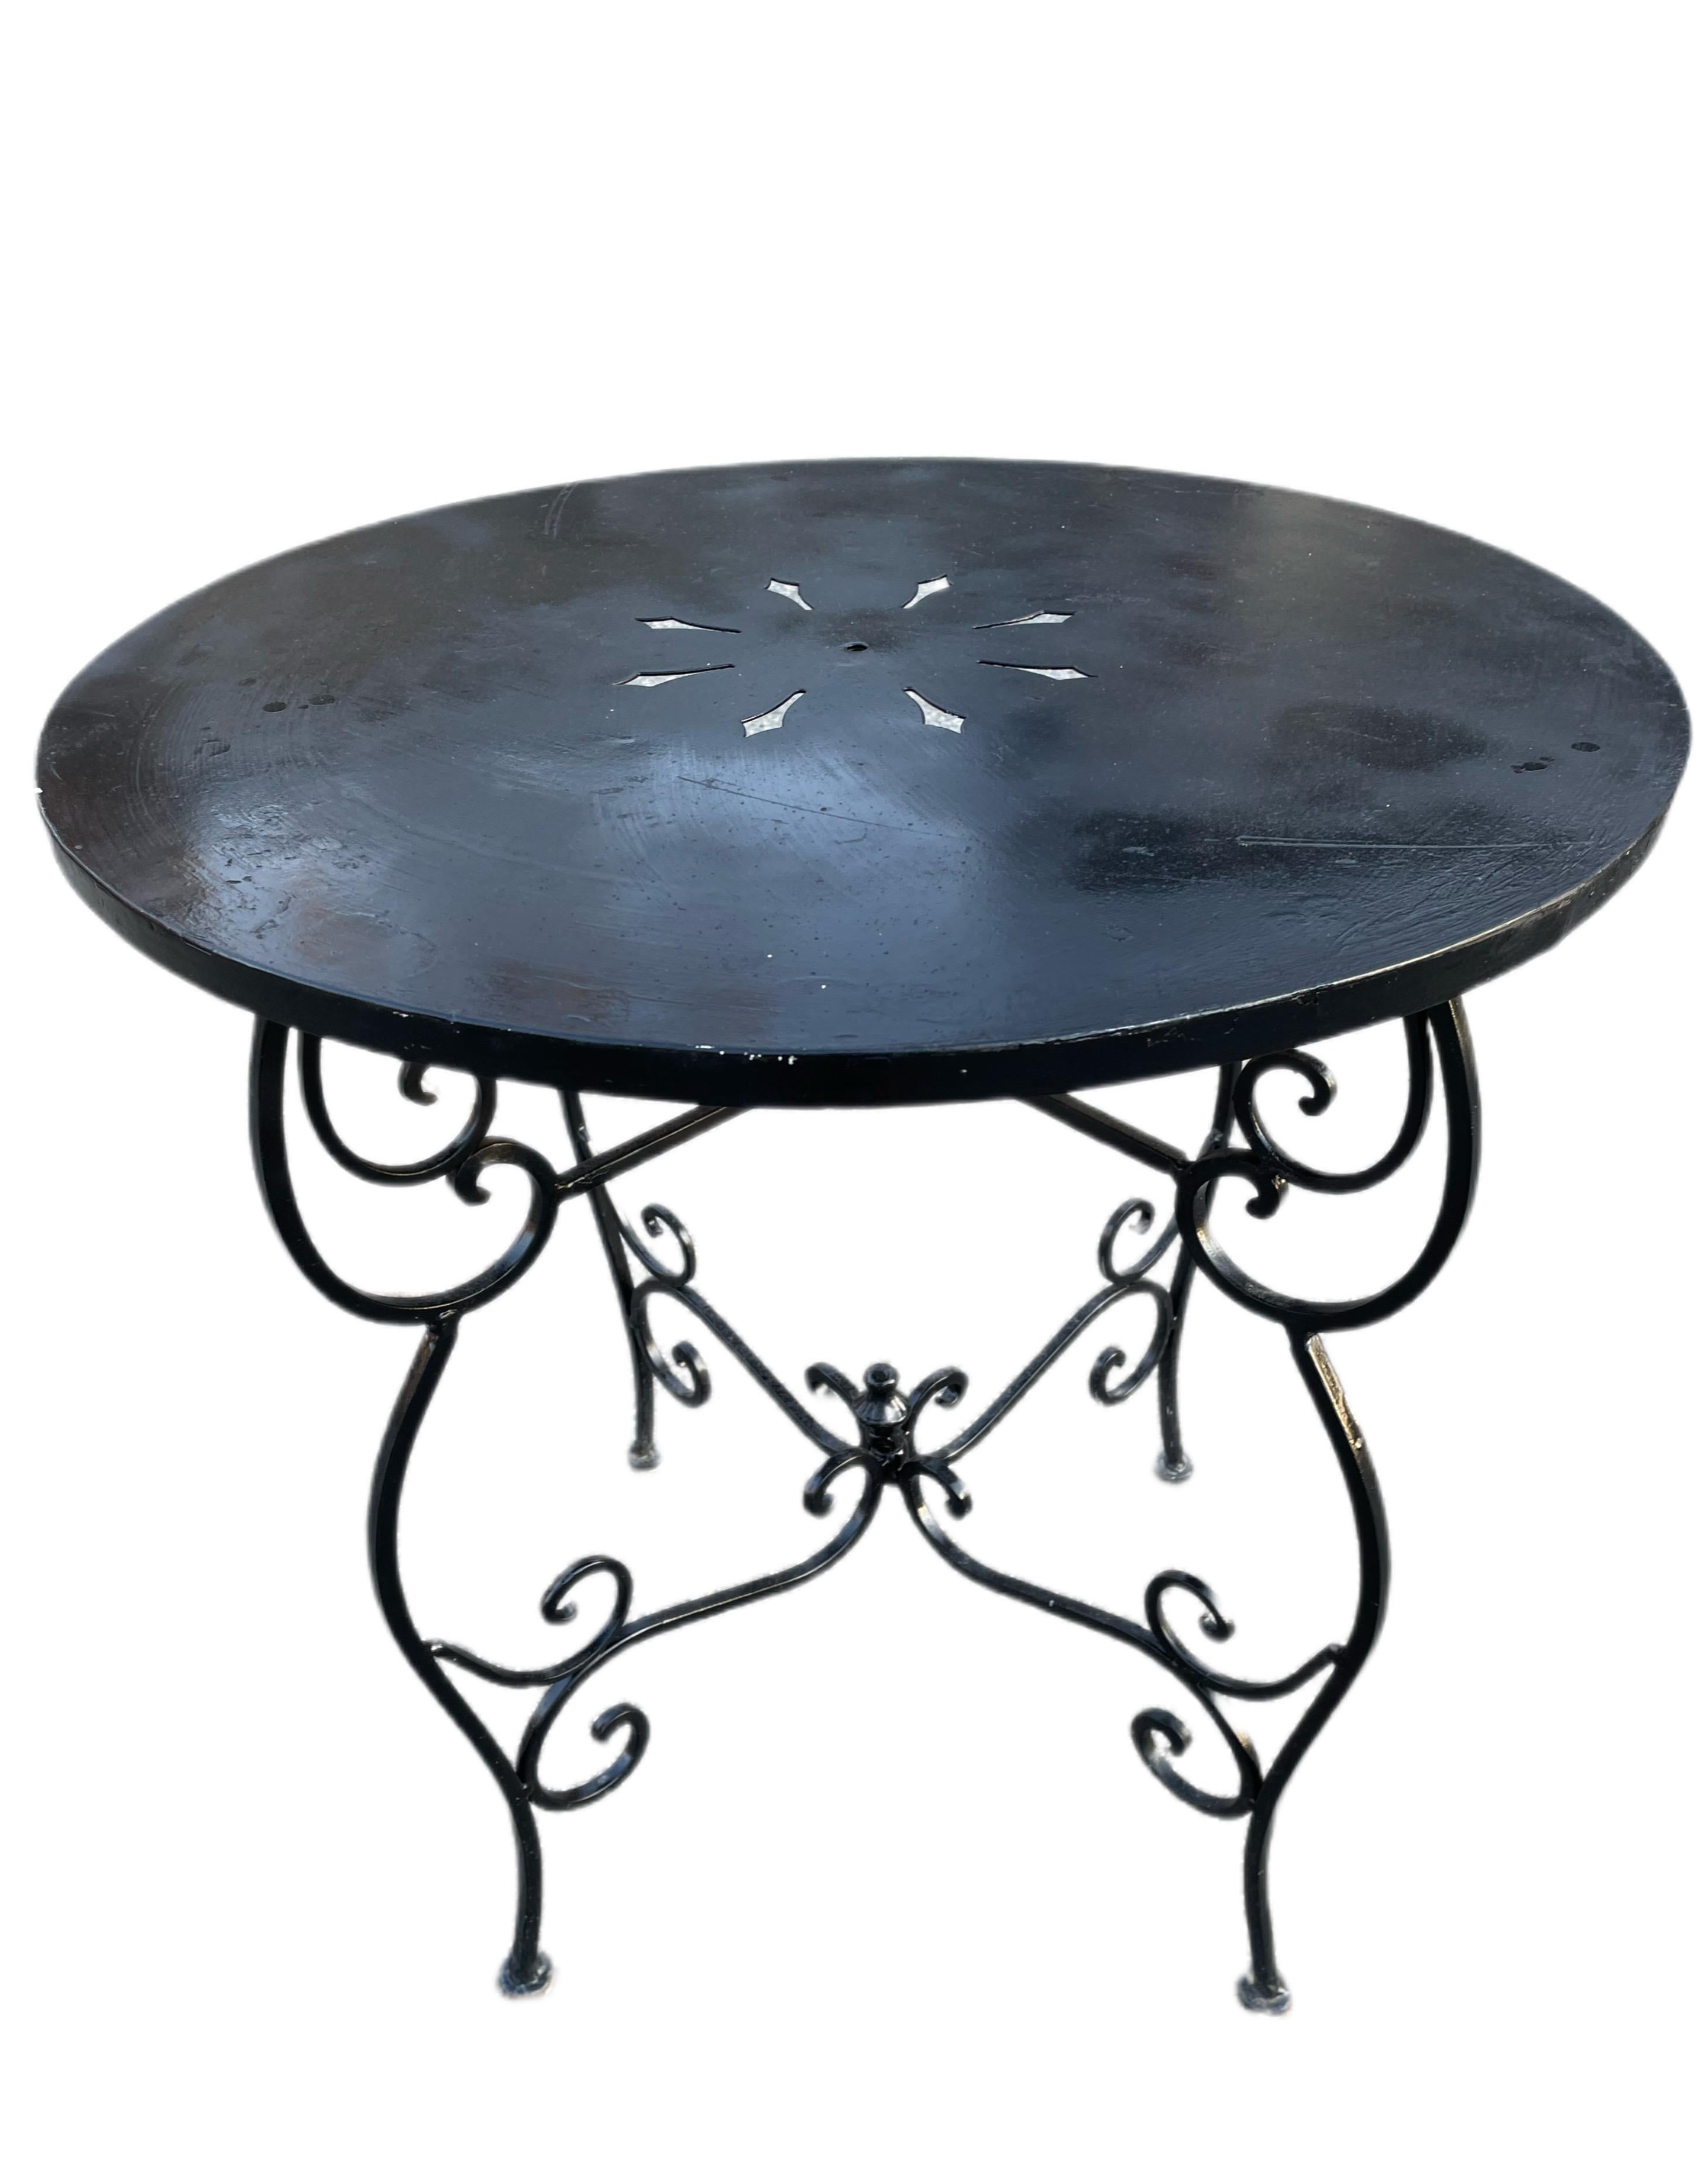 Wrought Iron Bistro Cafe Table In Good Condition For Sale In Cumberland, RI